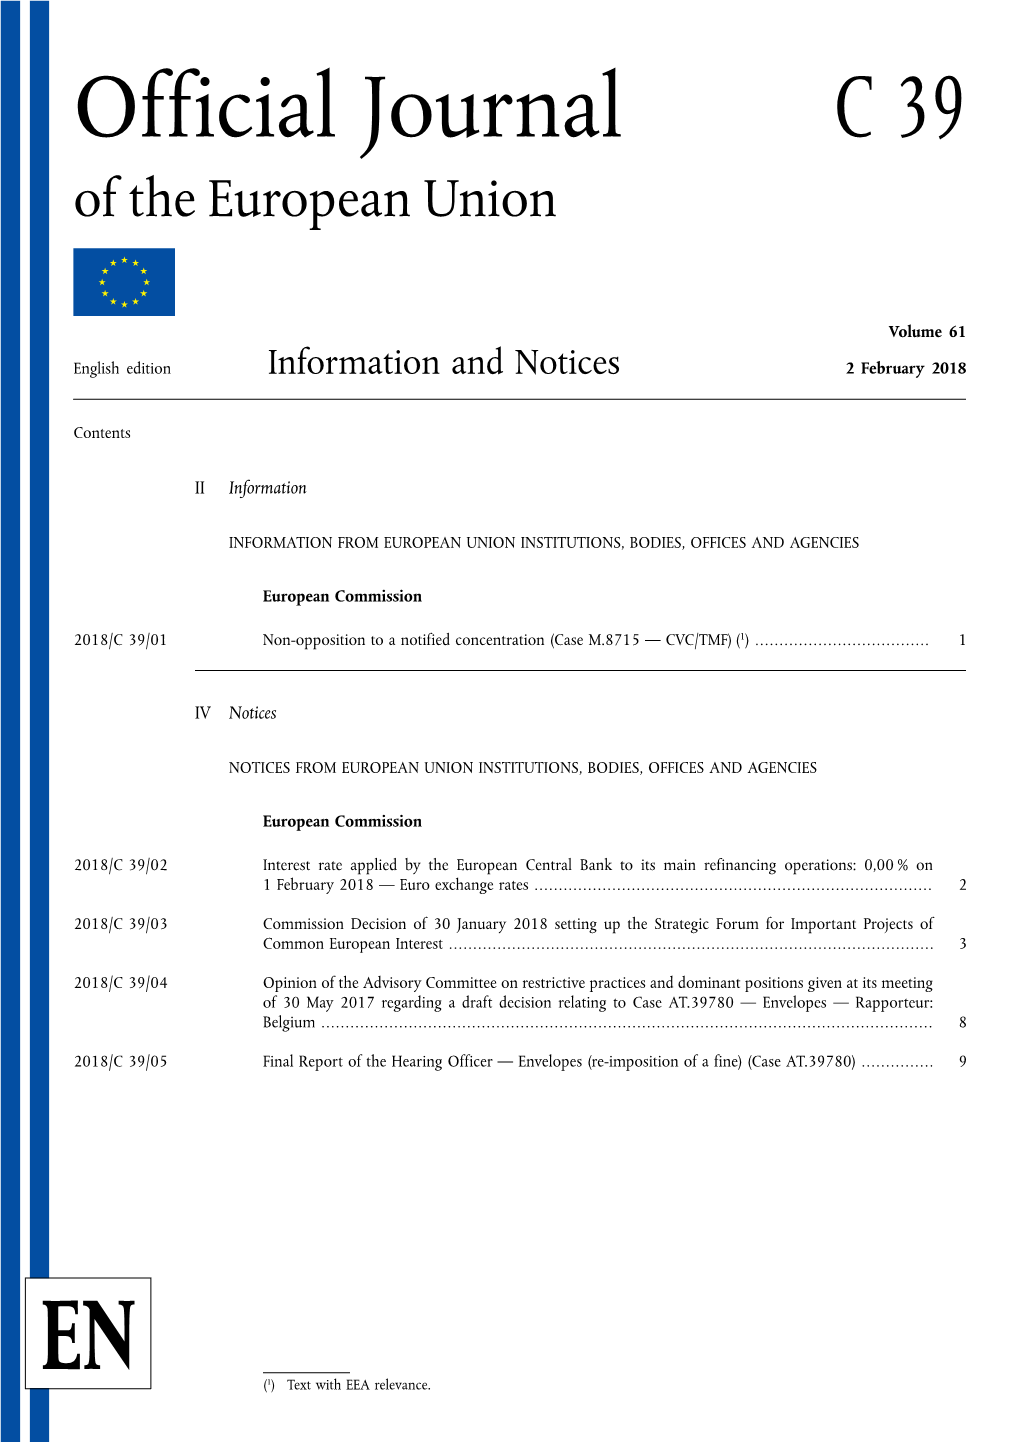 Official Journal C 39 of the European Union